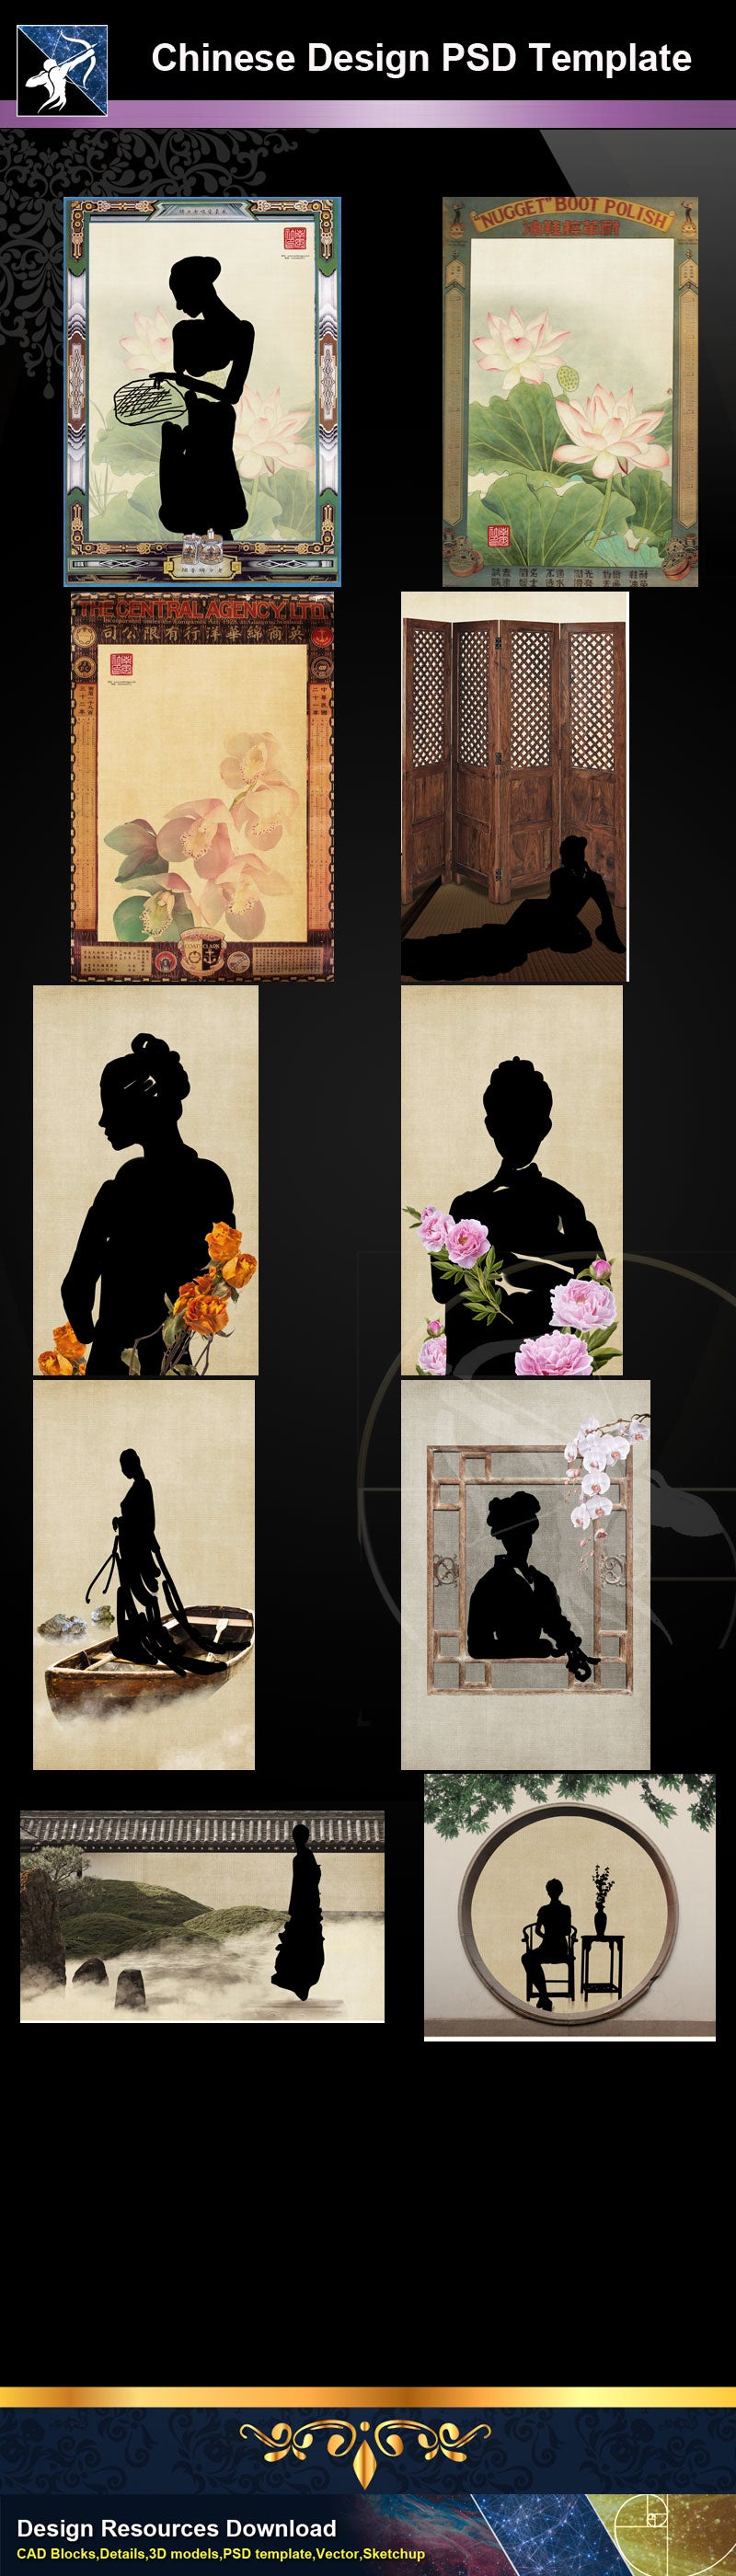 Photoshop PSD Chinese Design Templates “PSD” files can be used in chinese art design.